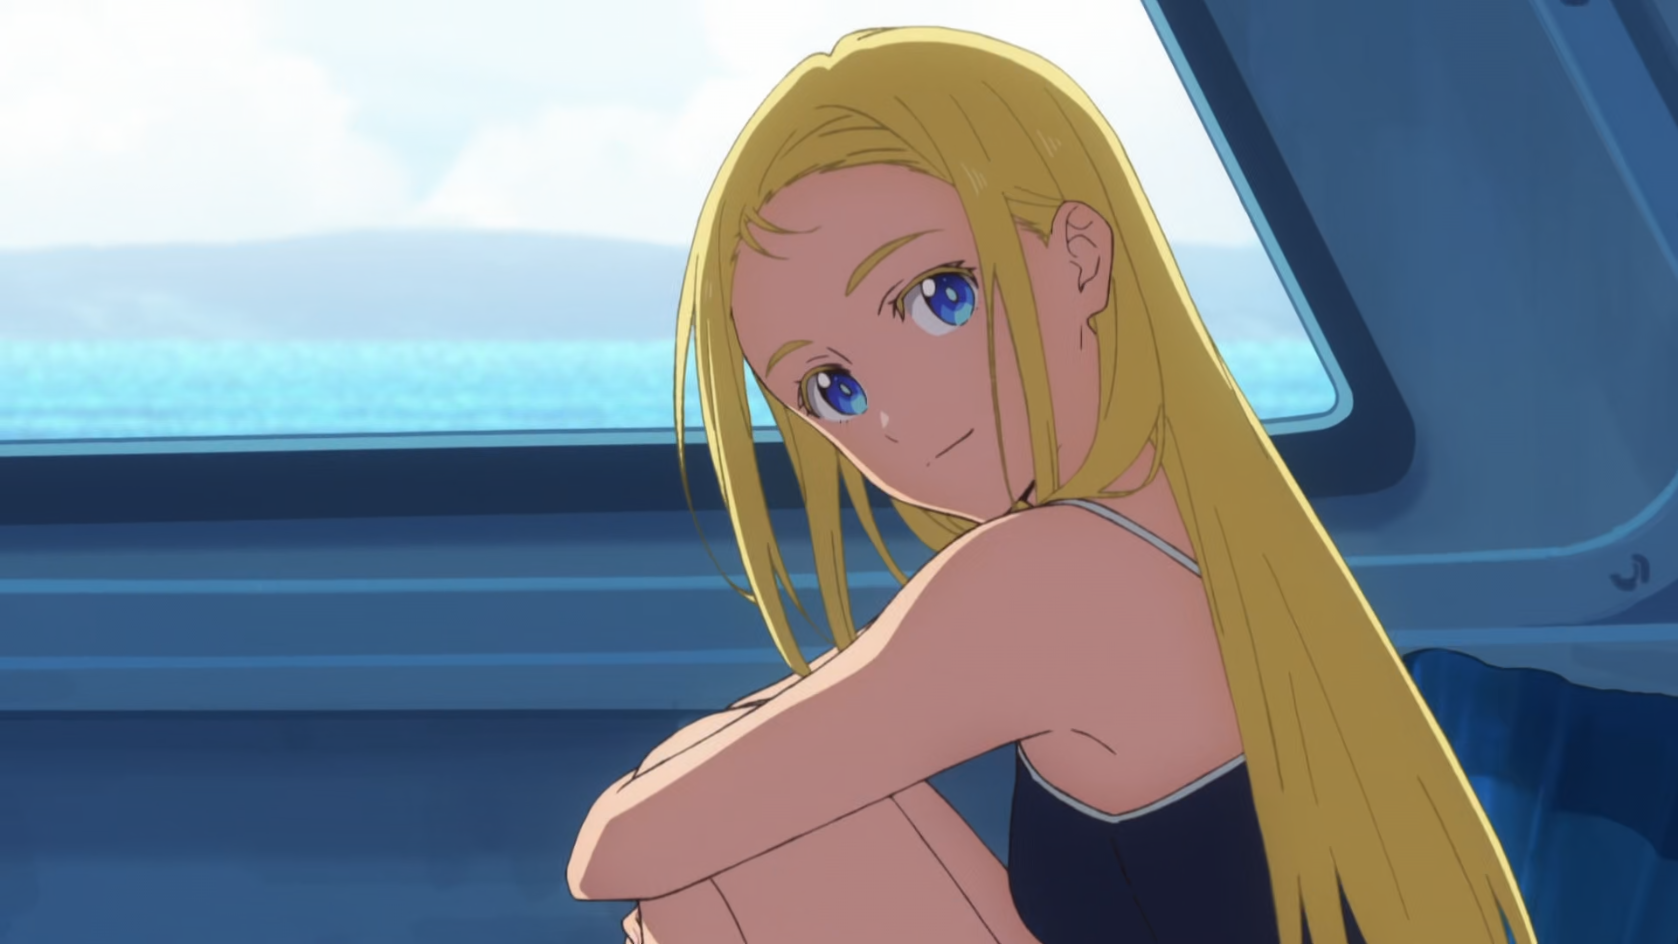 Summer Time Rendering Reveals Episode 12 Preview - Anime Corner